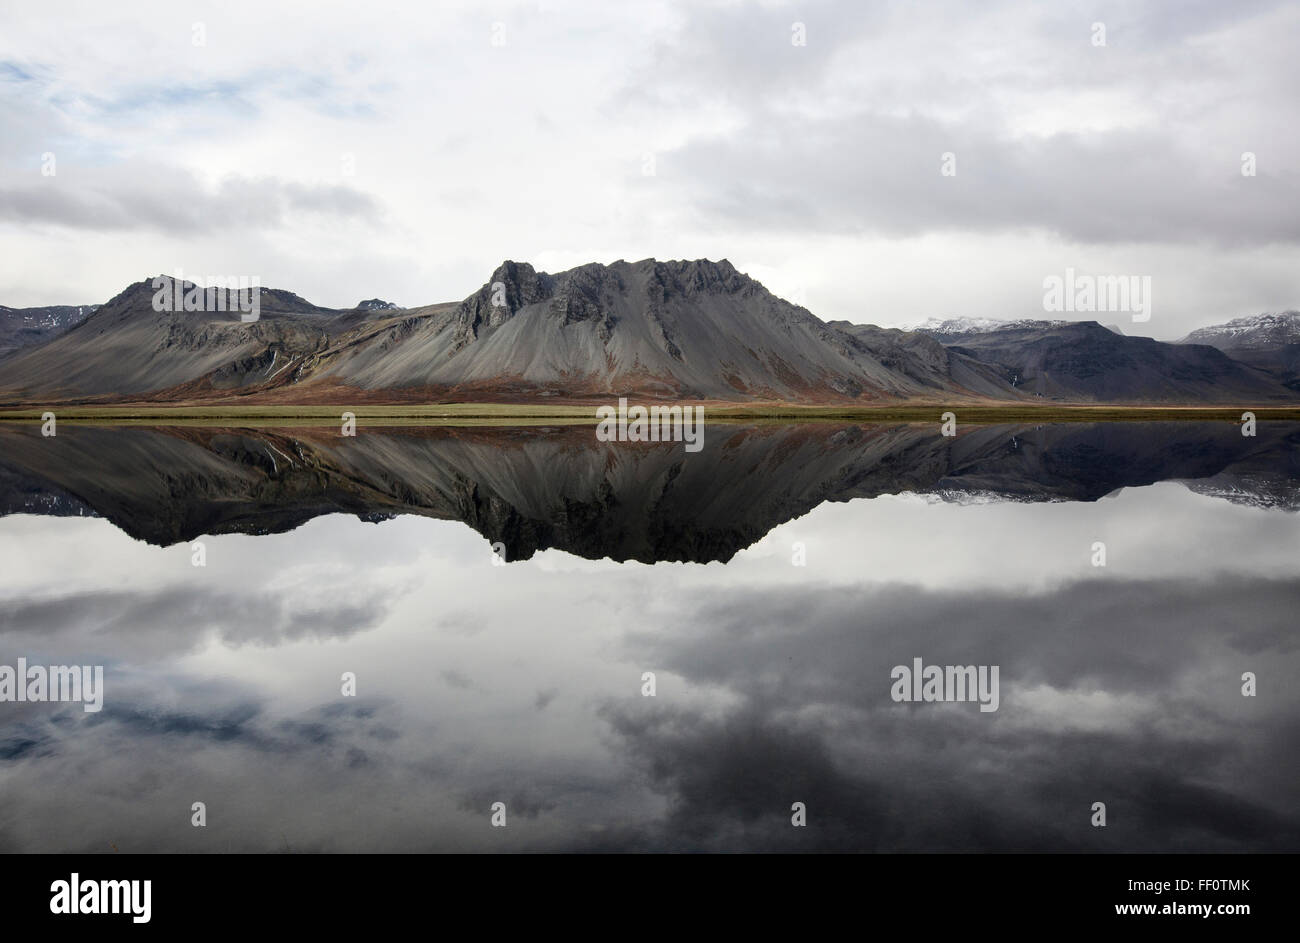 Mountains reflecting in still lake Stock Photo